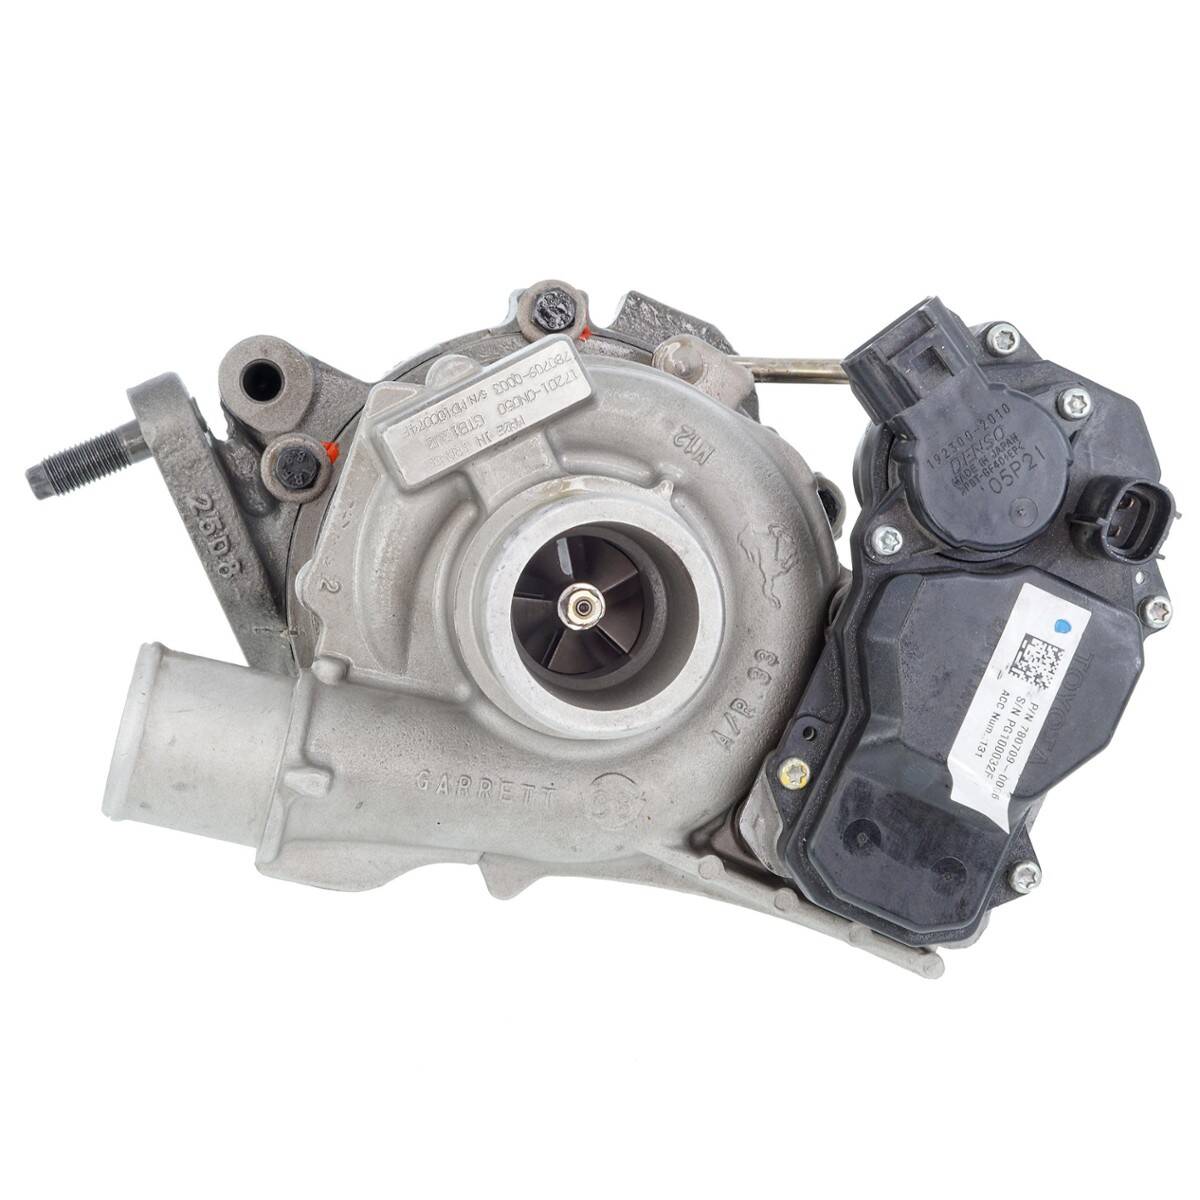 TURBOCHARGER TURBO REMANUFACTURED 780709 YARIS D-4D 780709-5003S 780709-5003S TOYOTA